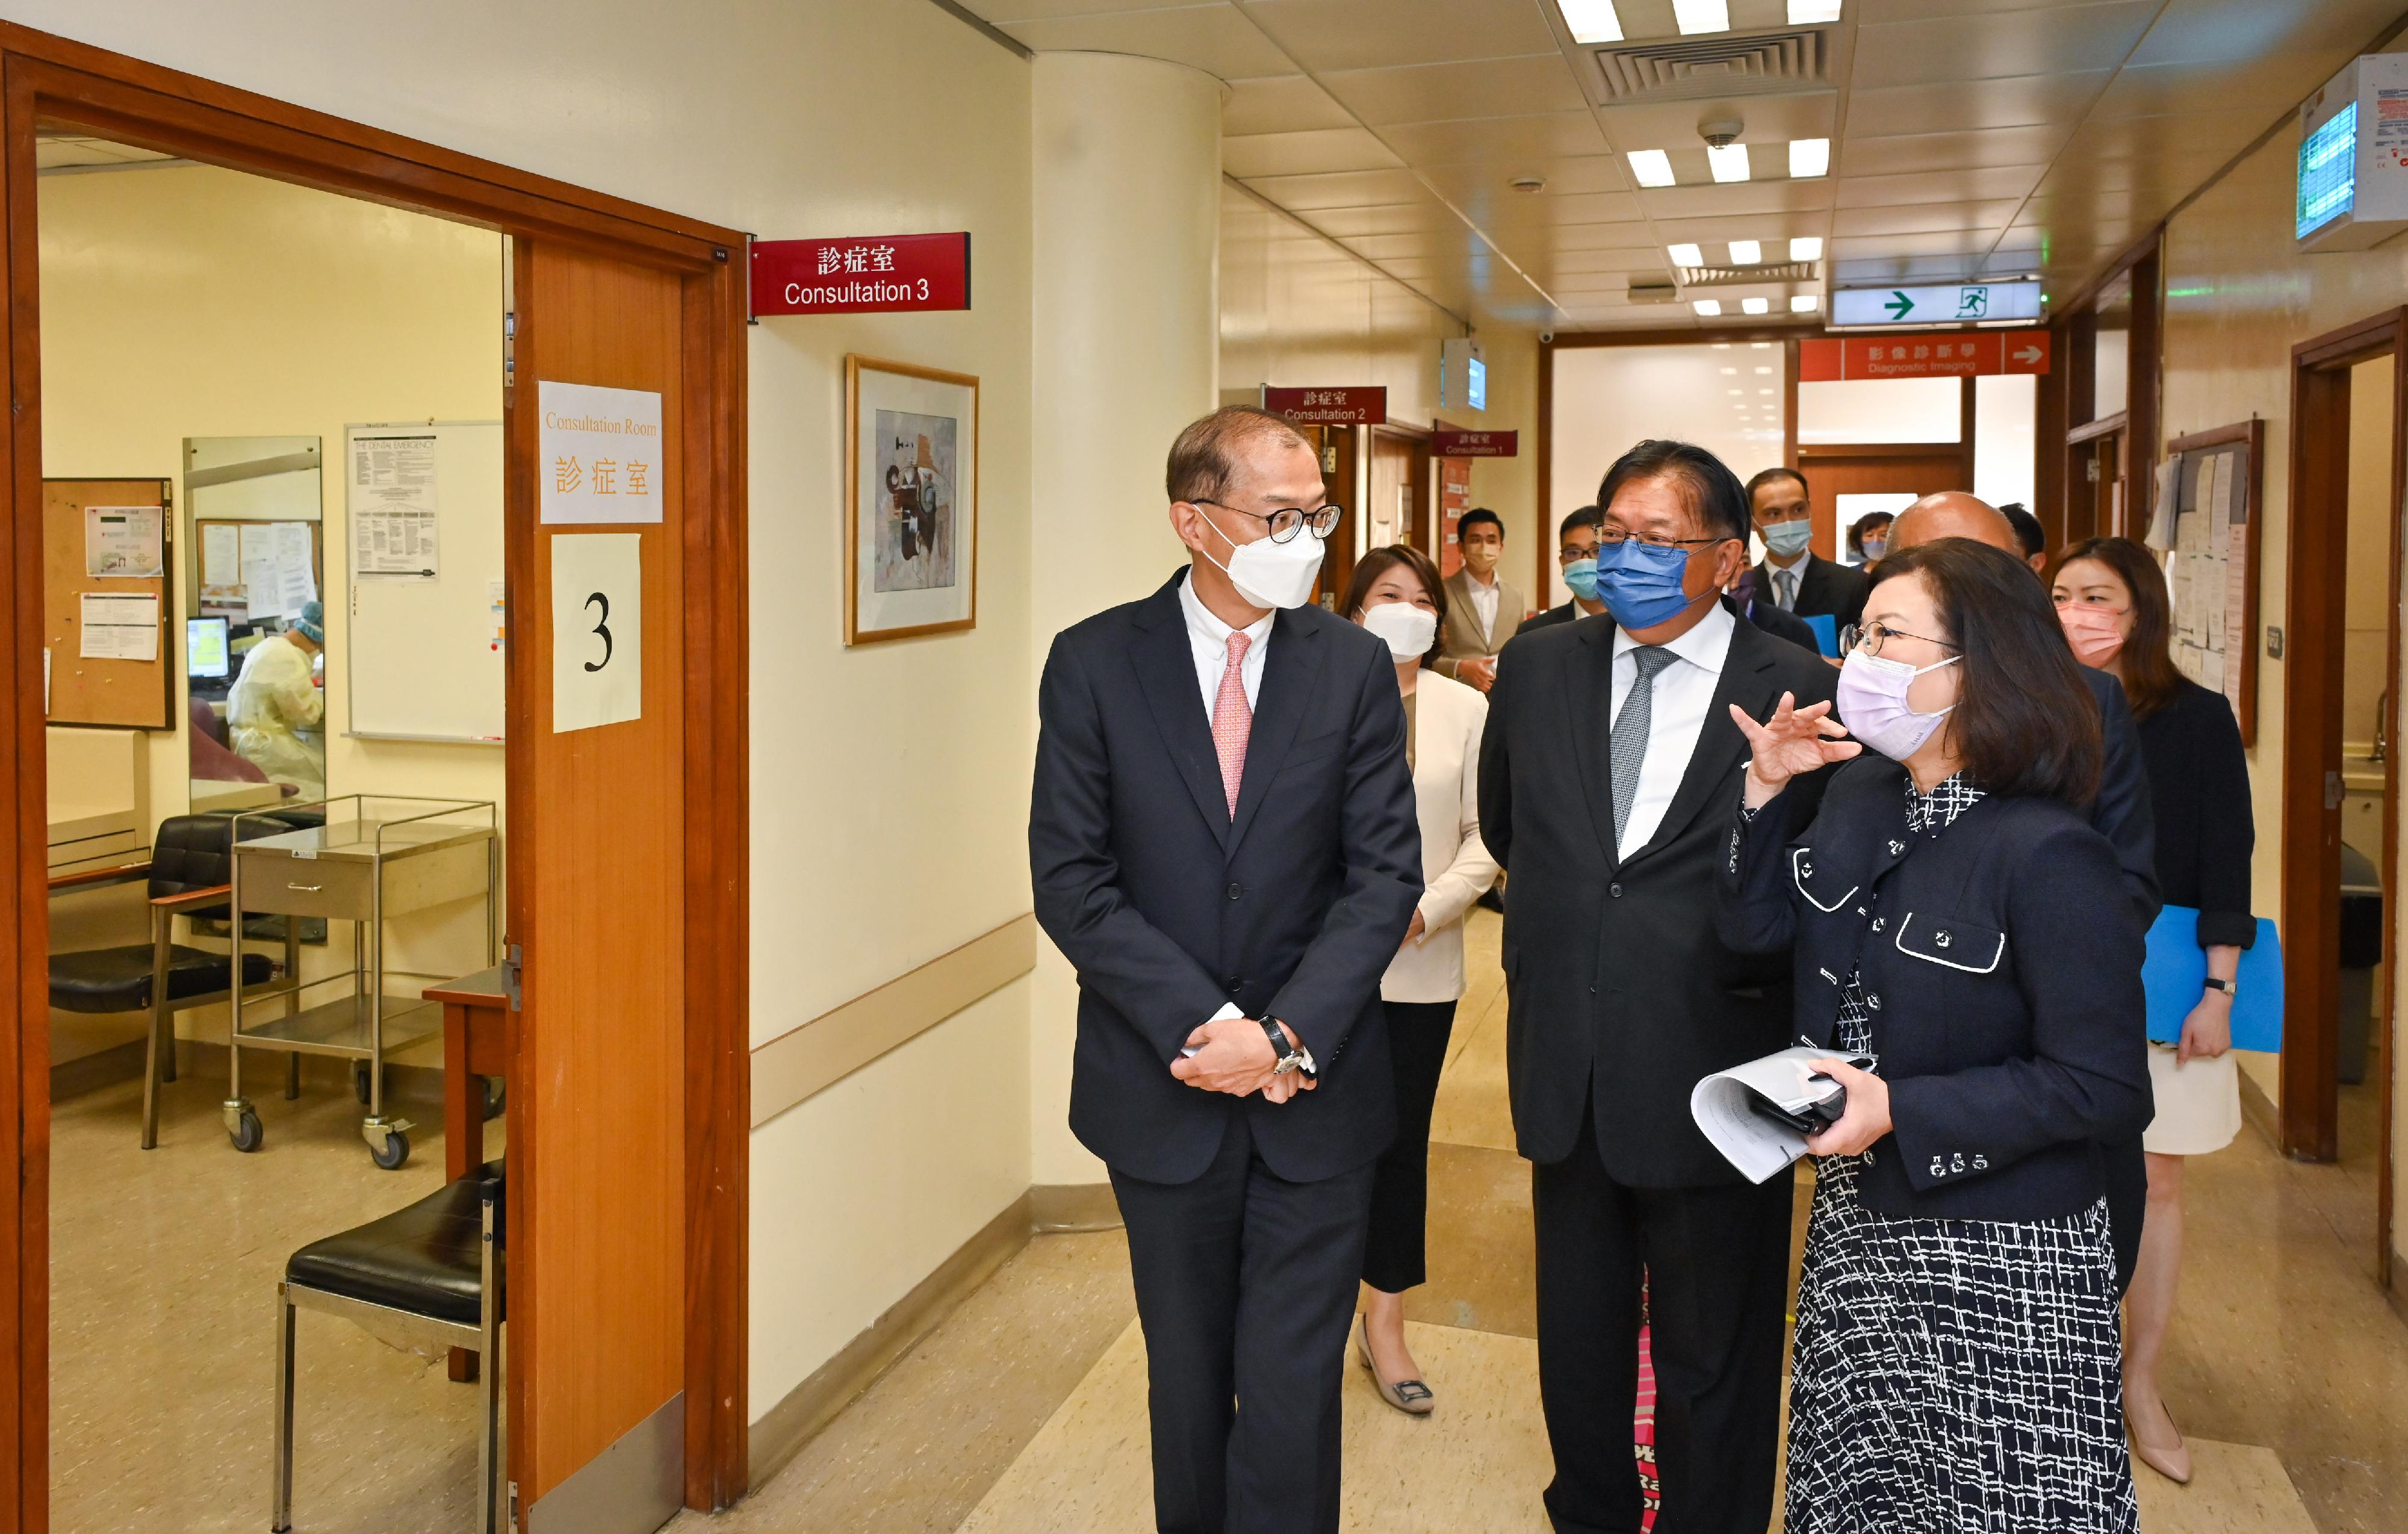 The Secretary for Health, Professor Lo Chung-mau (front row, left), and the Under Secretary for Health, Dr Libby Lee (back row, left), received an introduction by the Director of the Prince Philip Dental Hospital (PPDH), Professor Cynthia Yiu (front row, right), on the service provided at the PPDH's primary care clinic during their visit to the PPDH today (May 9). Accompanying them is the Chairman of the Board of Governors of PPDH, Mr Huen Wong (front row, centre).